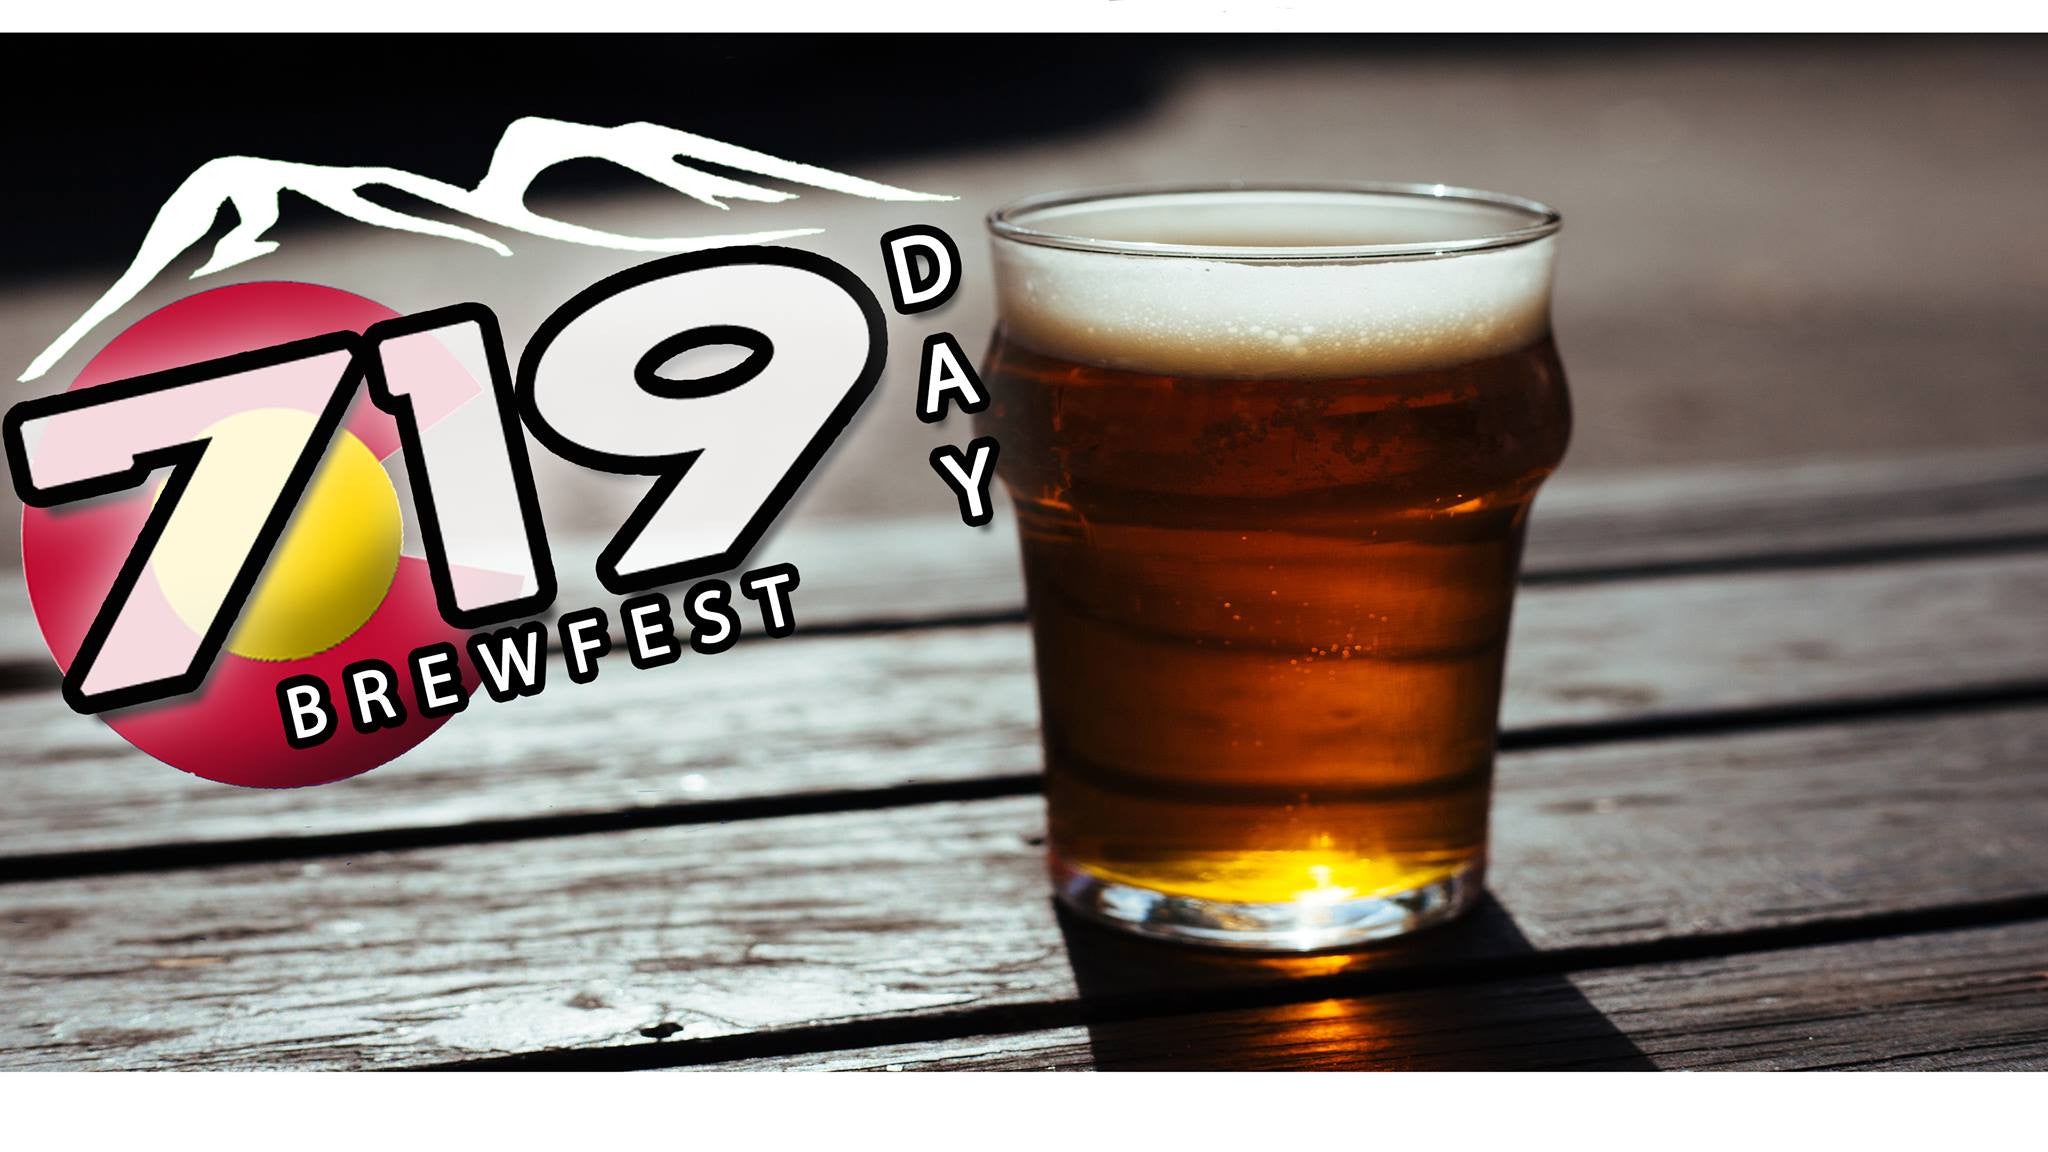 719 Day Brewfest and Beard Contest!